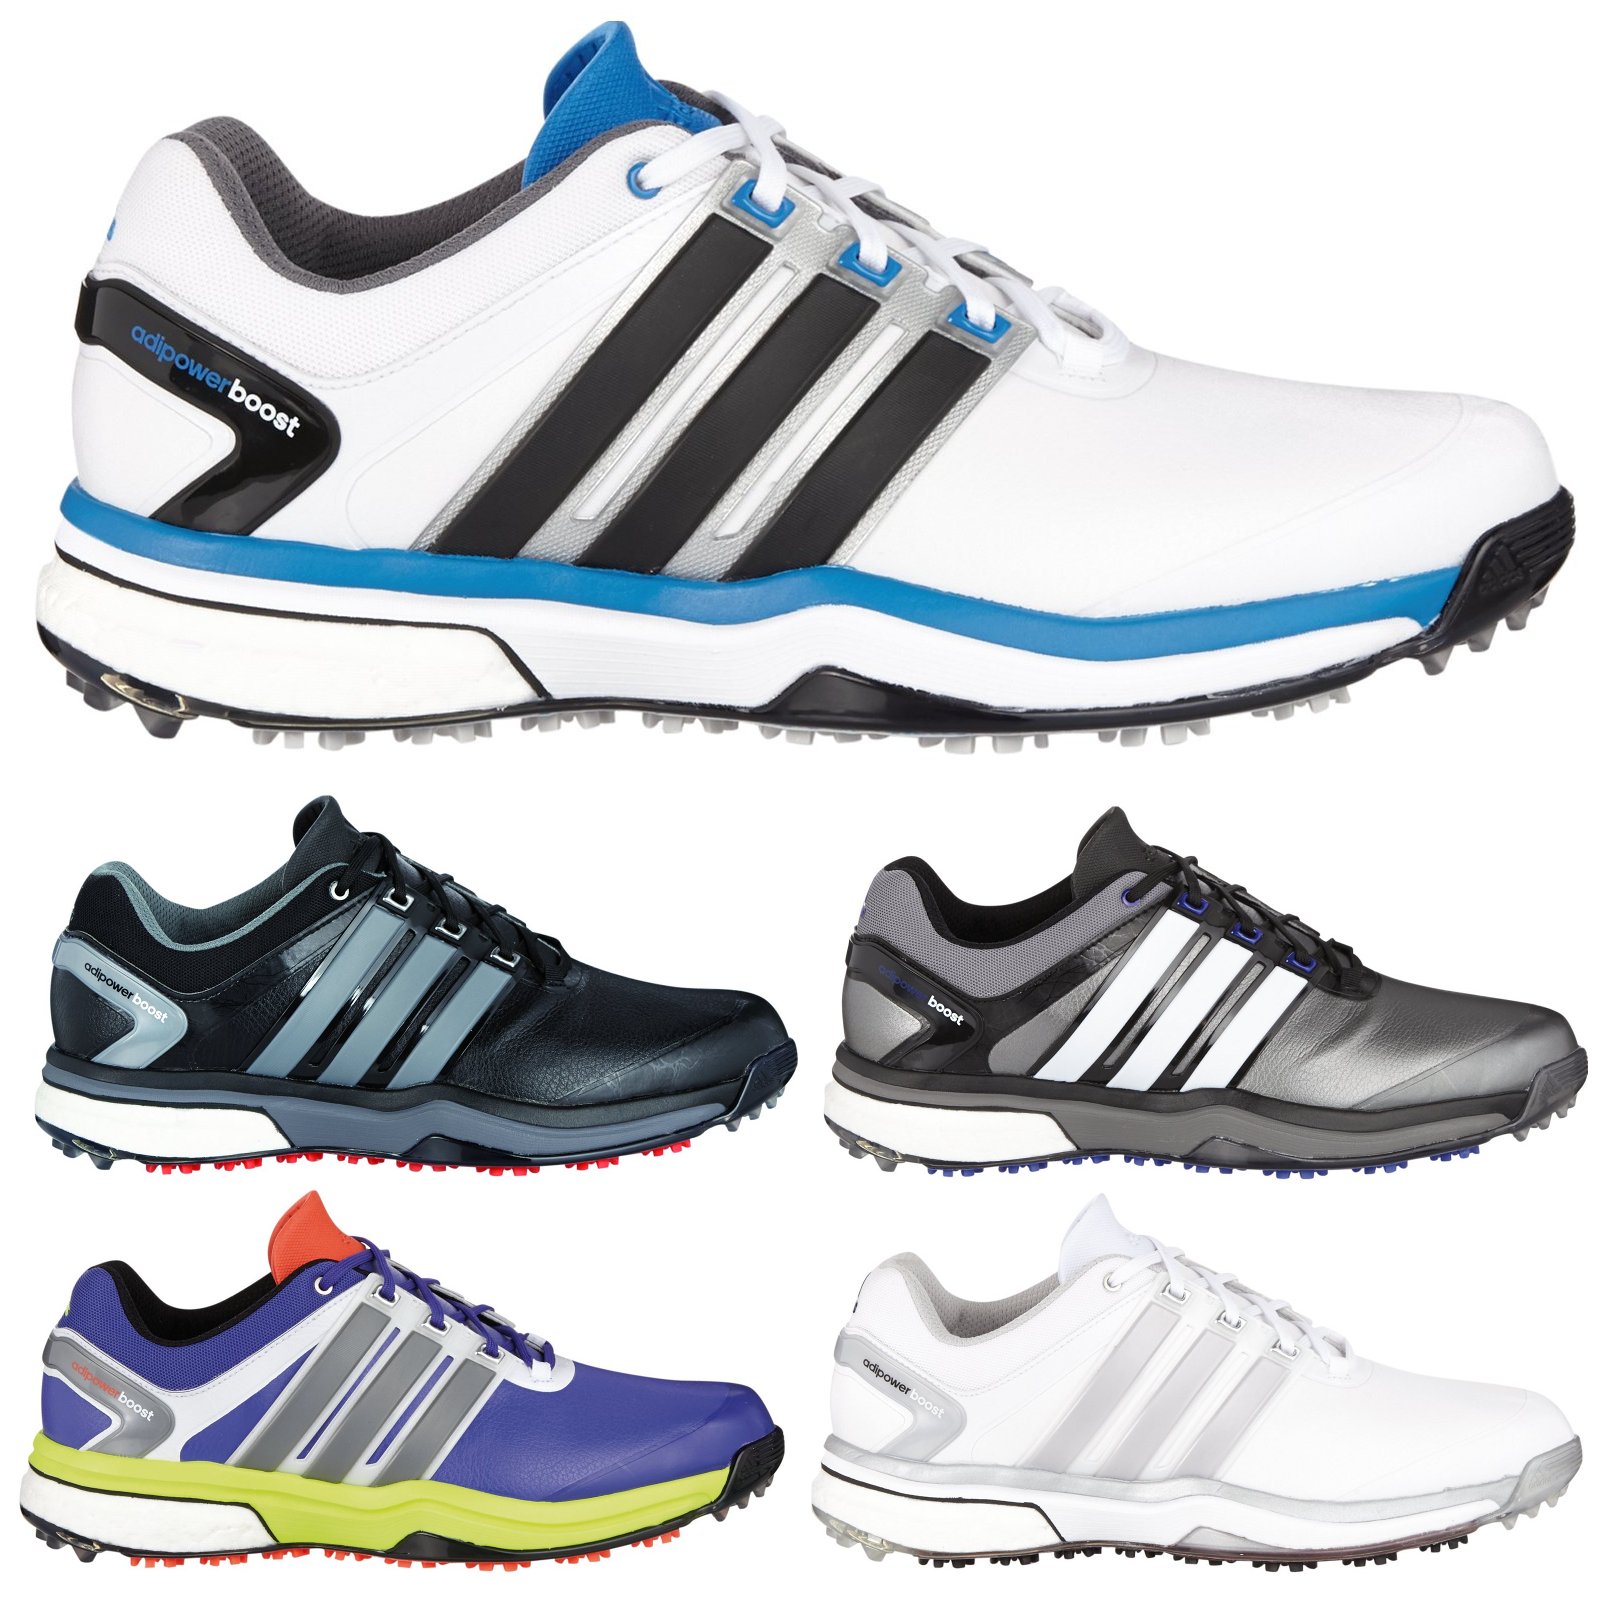 adidas 2015 adipower boost golf shoes